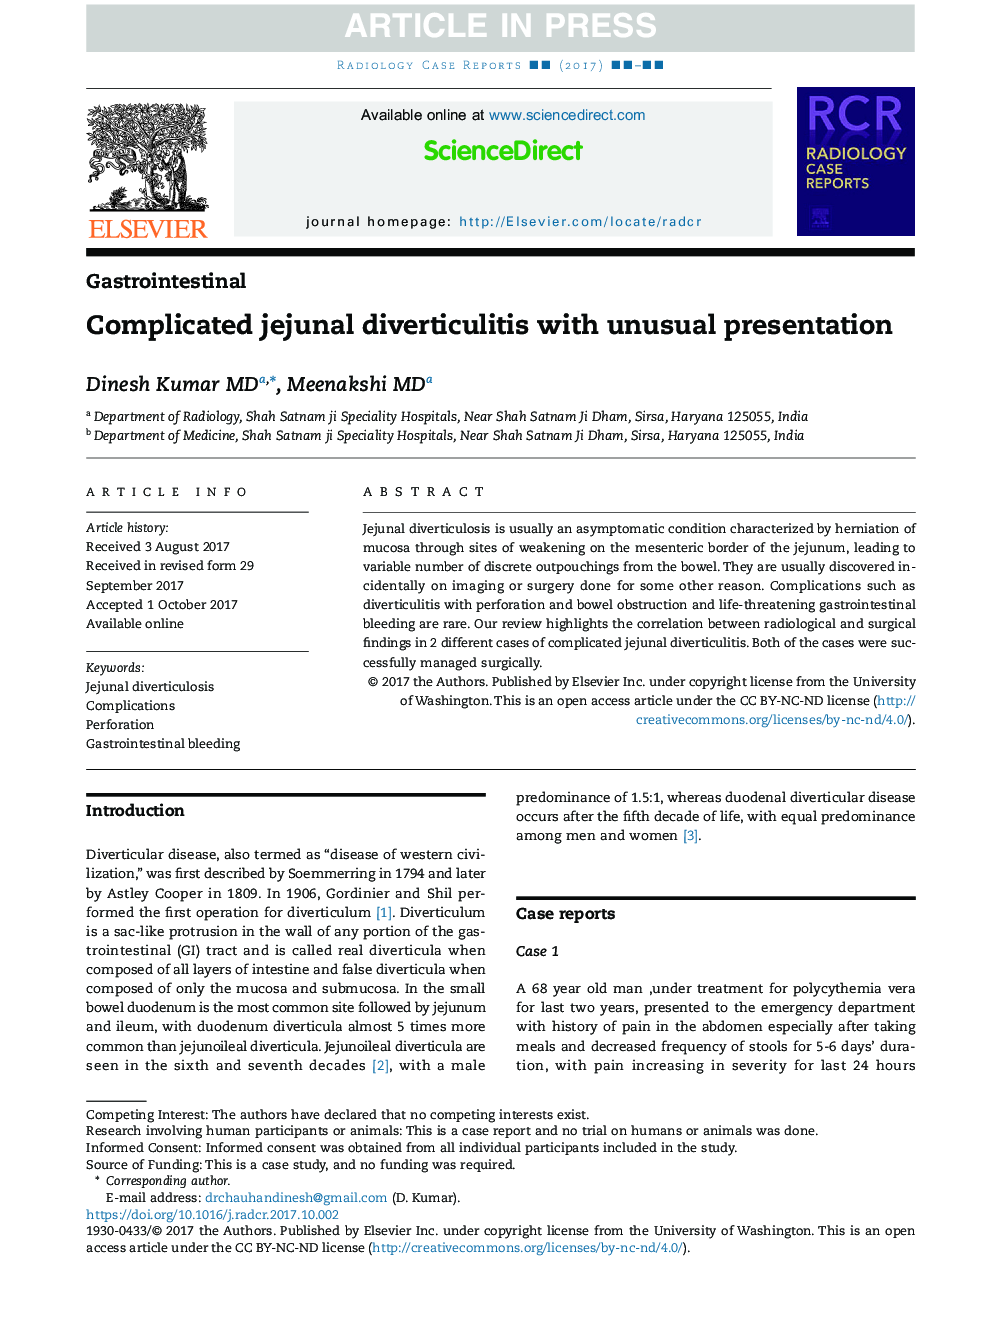 Complicated jejunal diverticulitis with unusual presentation